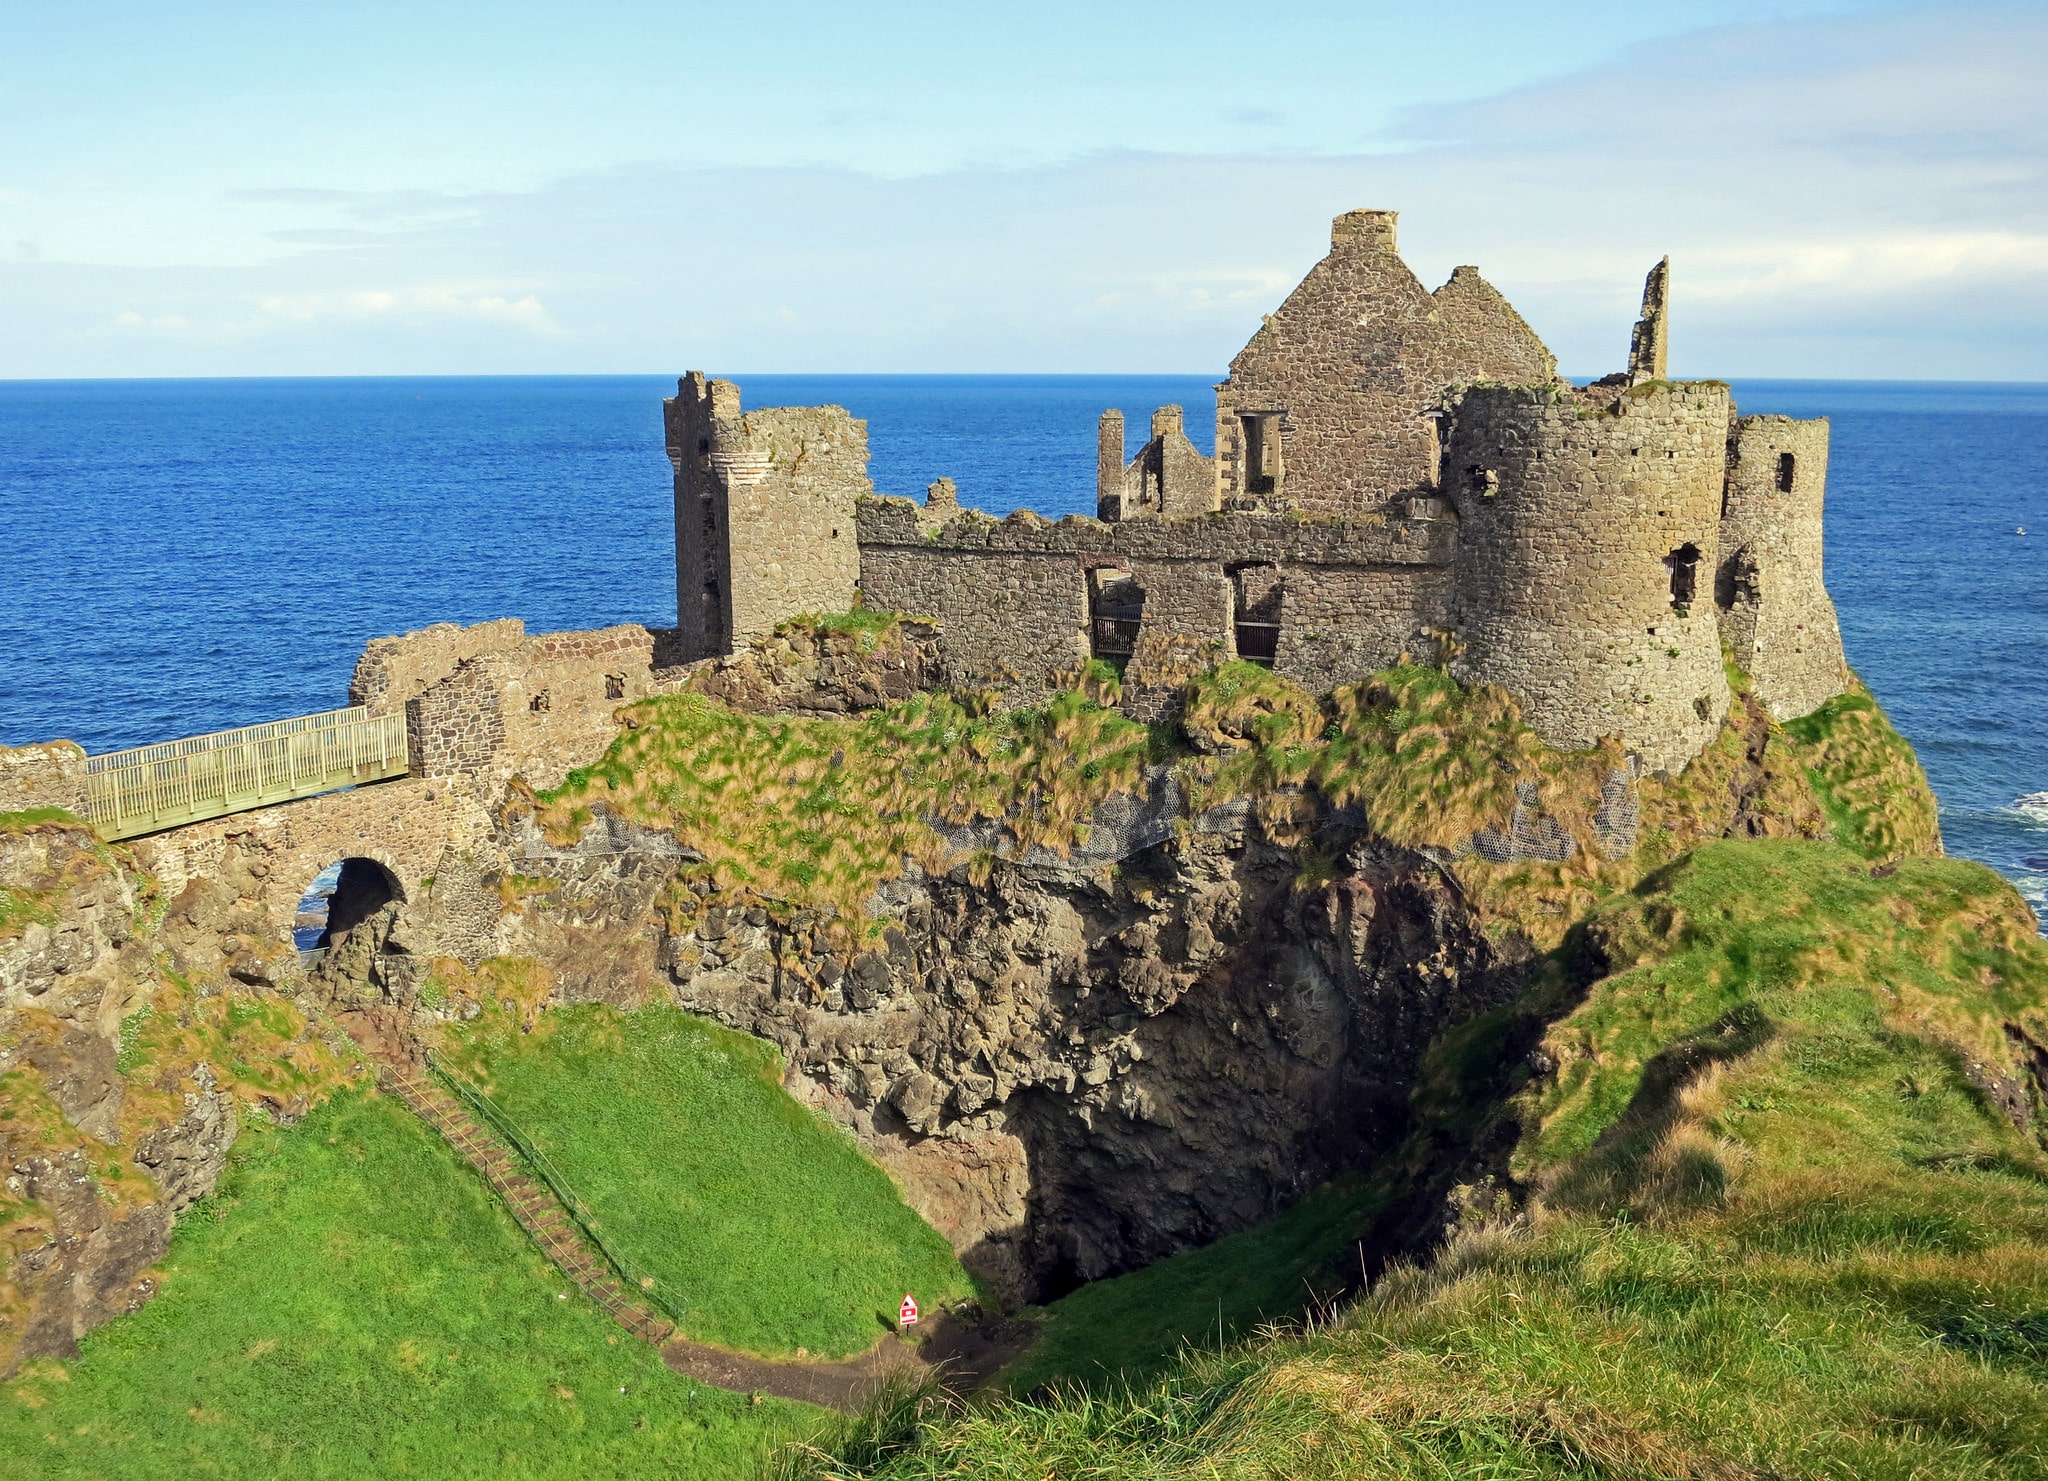 Exploring Dunluce Castle is one of the coolest things to do in Northern Ireland